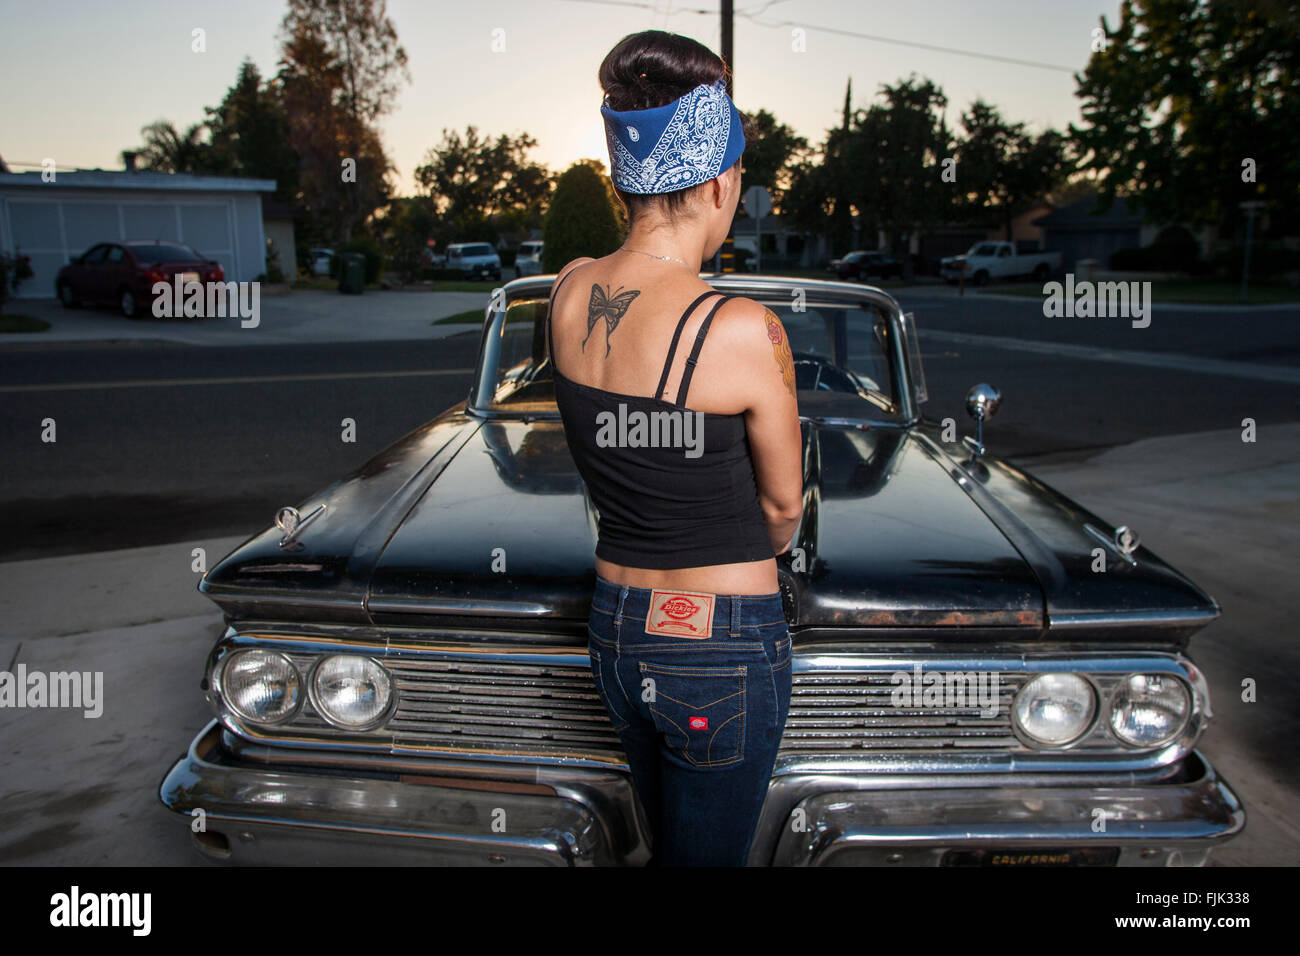 LOS ANGELES, CA – JUNE 29: Latina’s of the L.A. based car club 'The Black Widows' in Los Angeles, California on June 29, 2005. Stock Photo